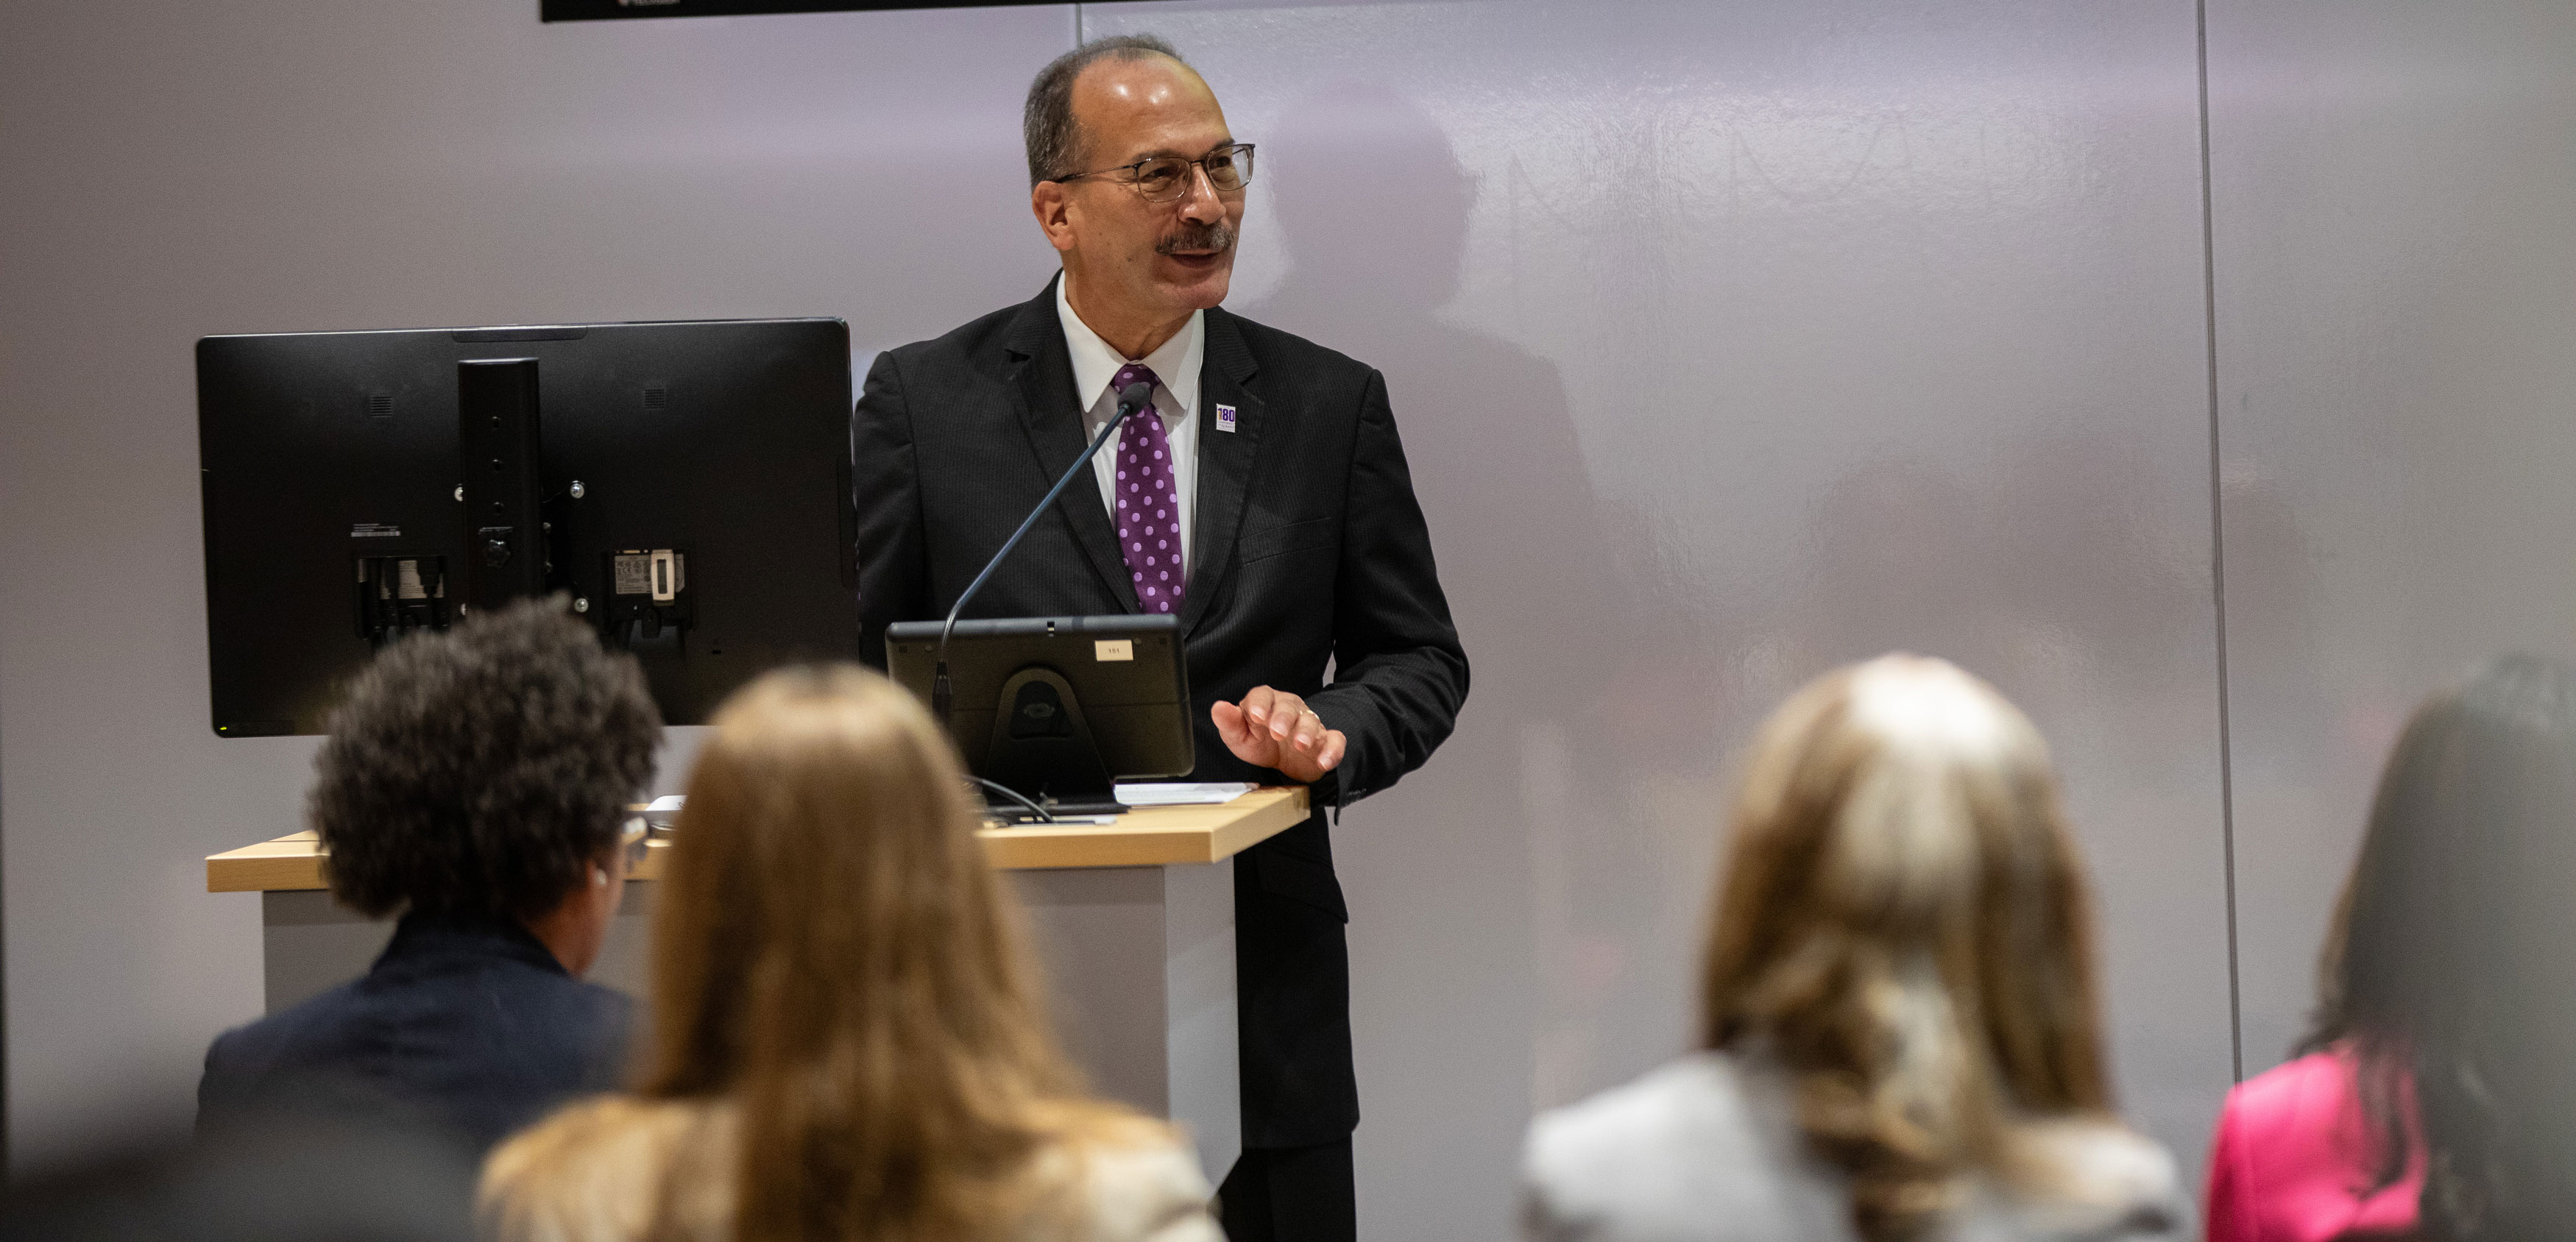 UAlbany President Havidán Rodríguez speaks at a podium with a computer in front of a room of people.